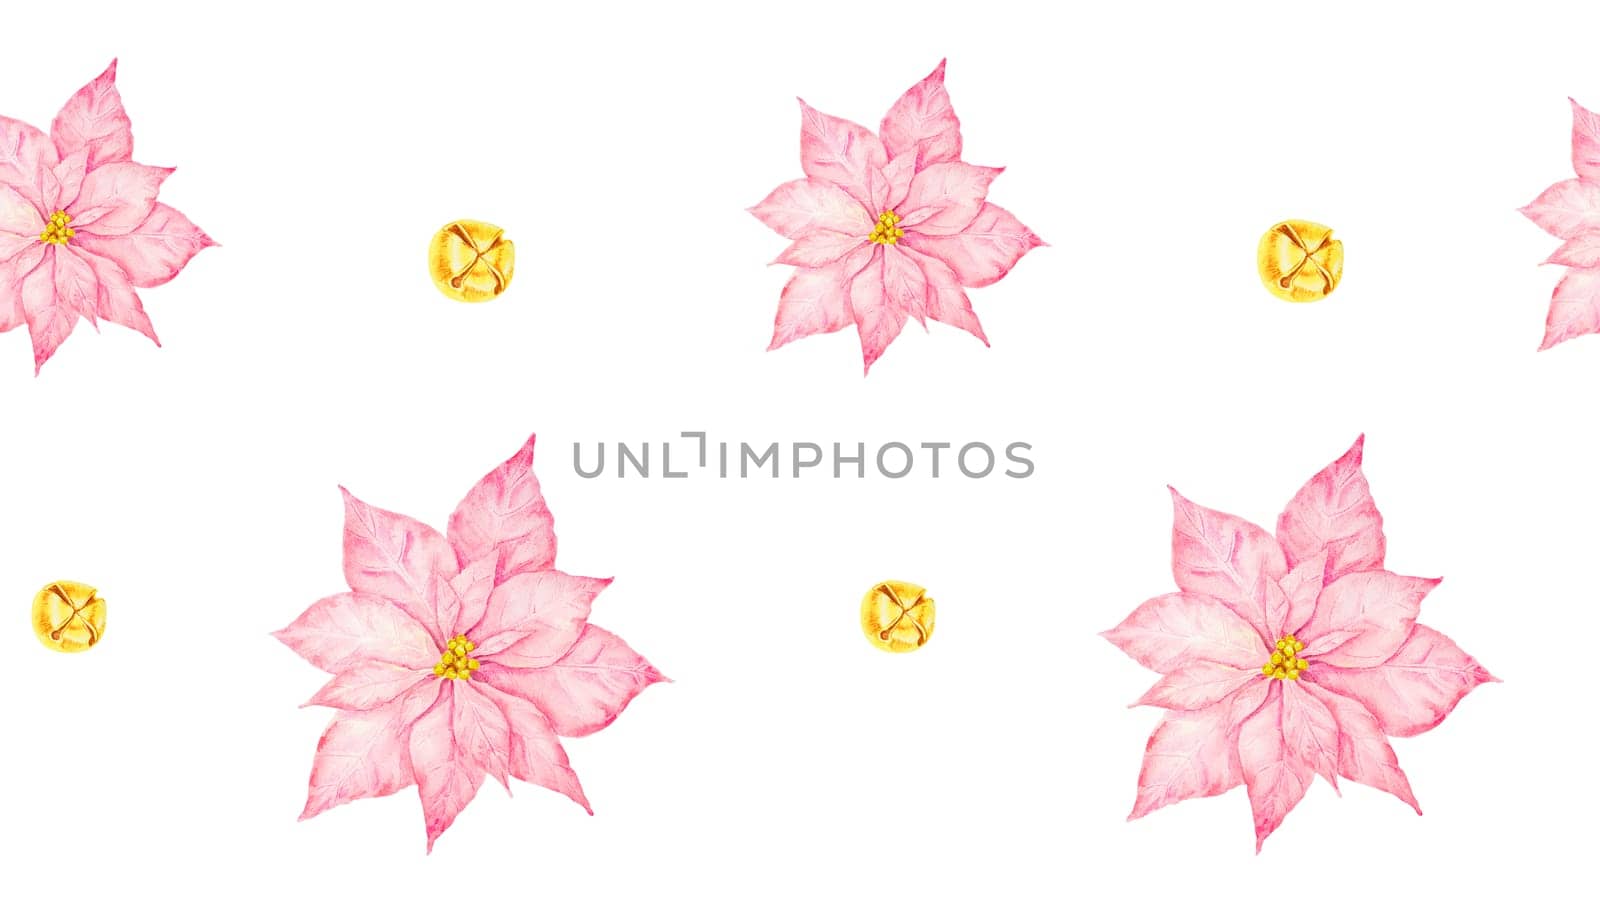 Pink poinsettia and gold bells. Watercolor hand drawn seamless border with Christmas sweets. Winter symbols for holiday season prints, background, packing paper, textile, fabric